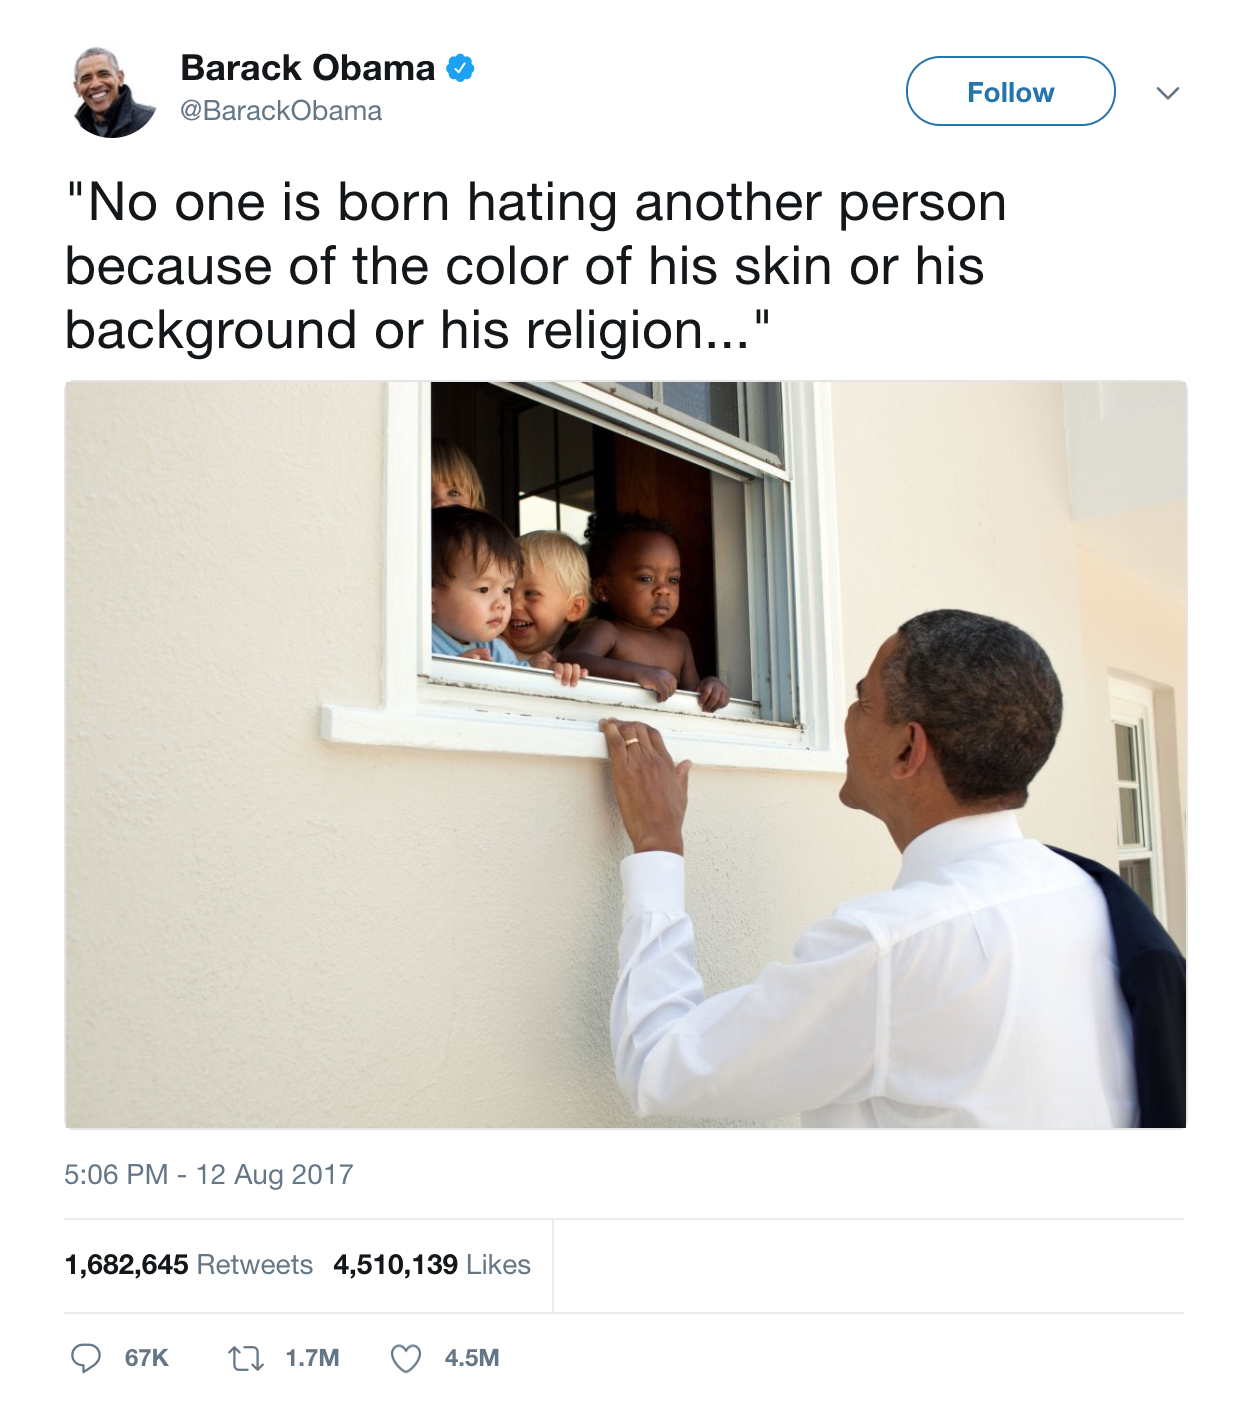 Barack Obama tweets Nelson Mandela quote No one is born hating another person based on the color of his skin or his background or religion